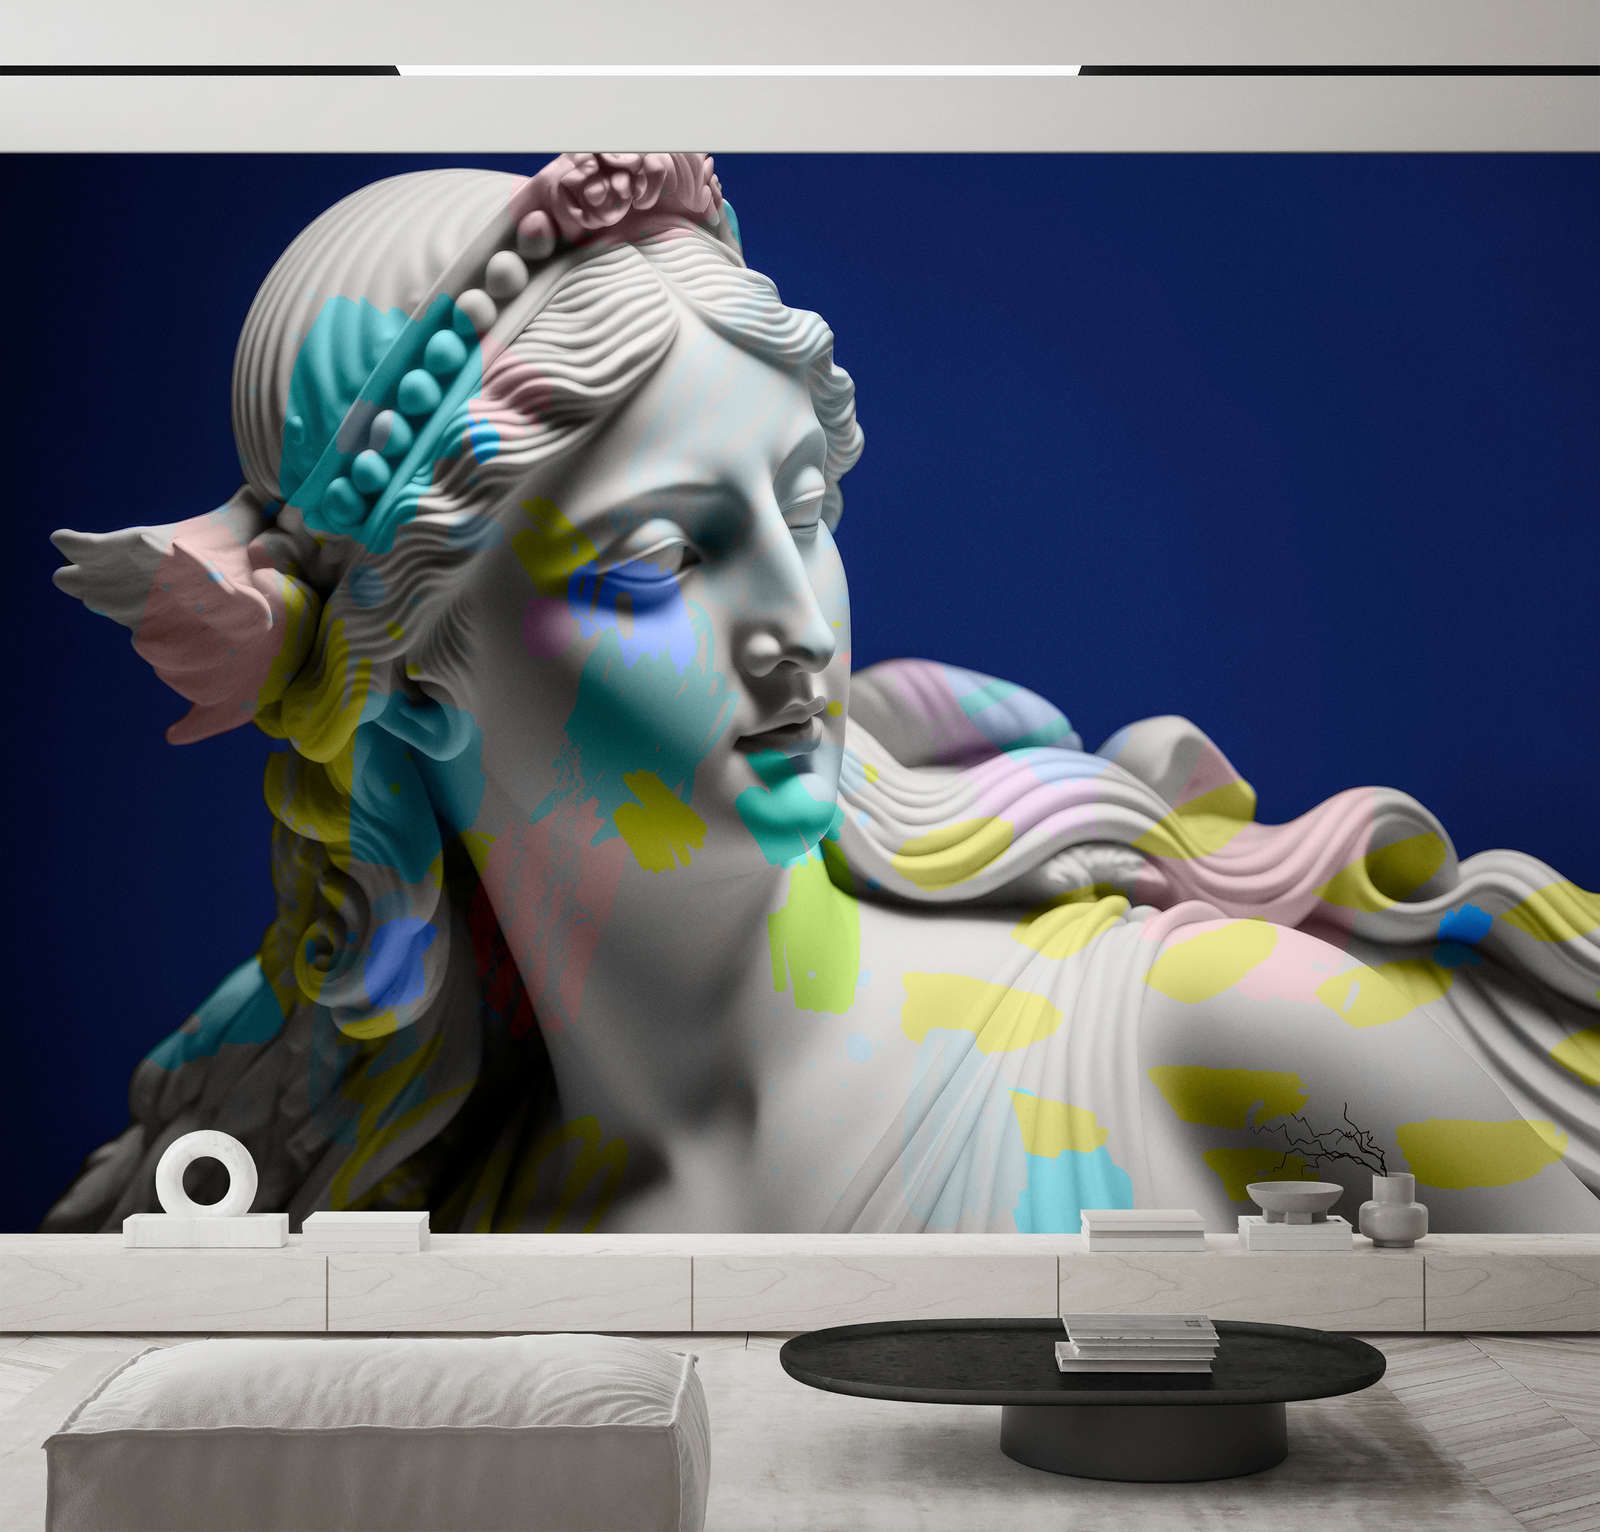             Photo wallpaper »anthea« - female sculpture with colourful accents - Smooth, slightly pearly shimmering non-woven fabric
        